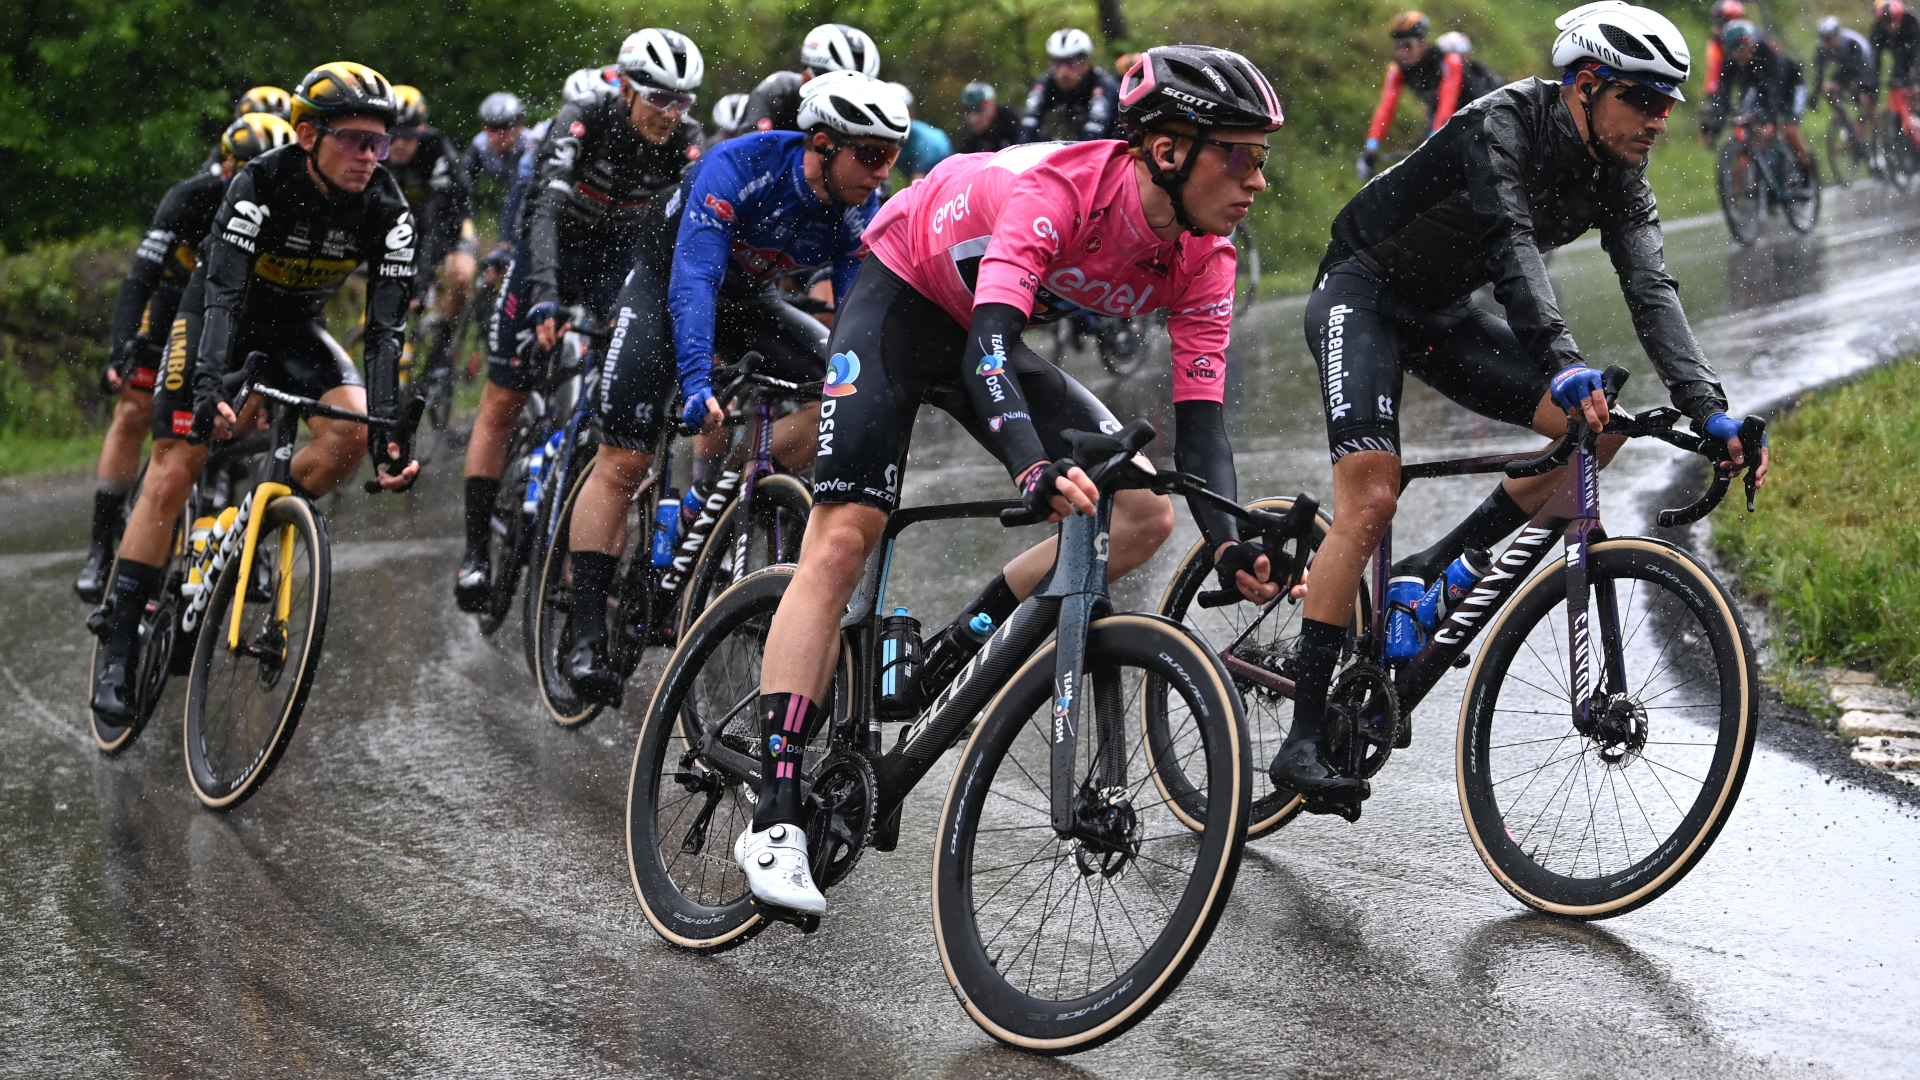 How to watch Giro d'Italia live stream stages 7, 8 and 9 for free